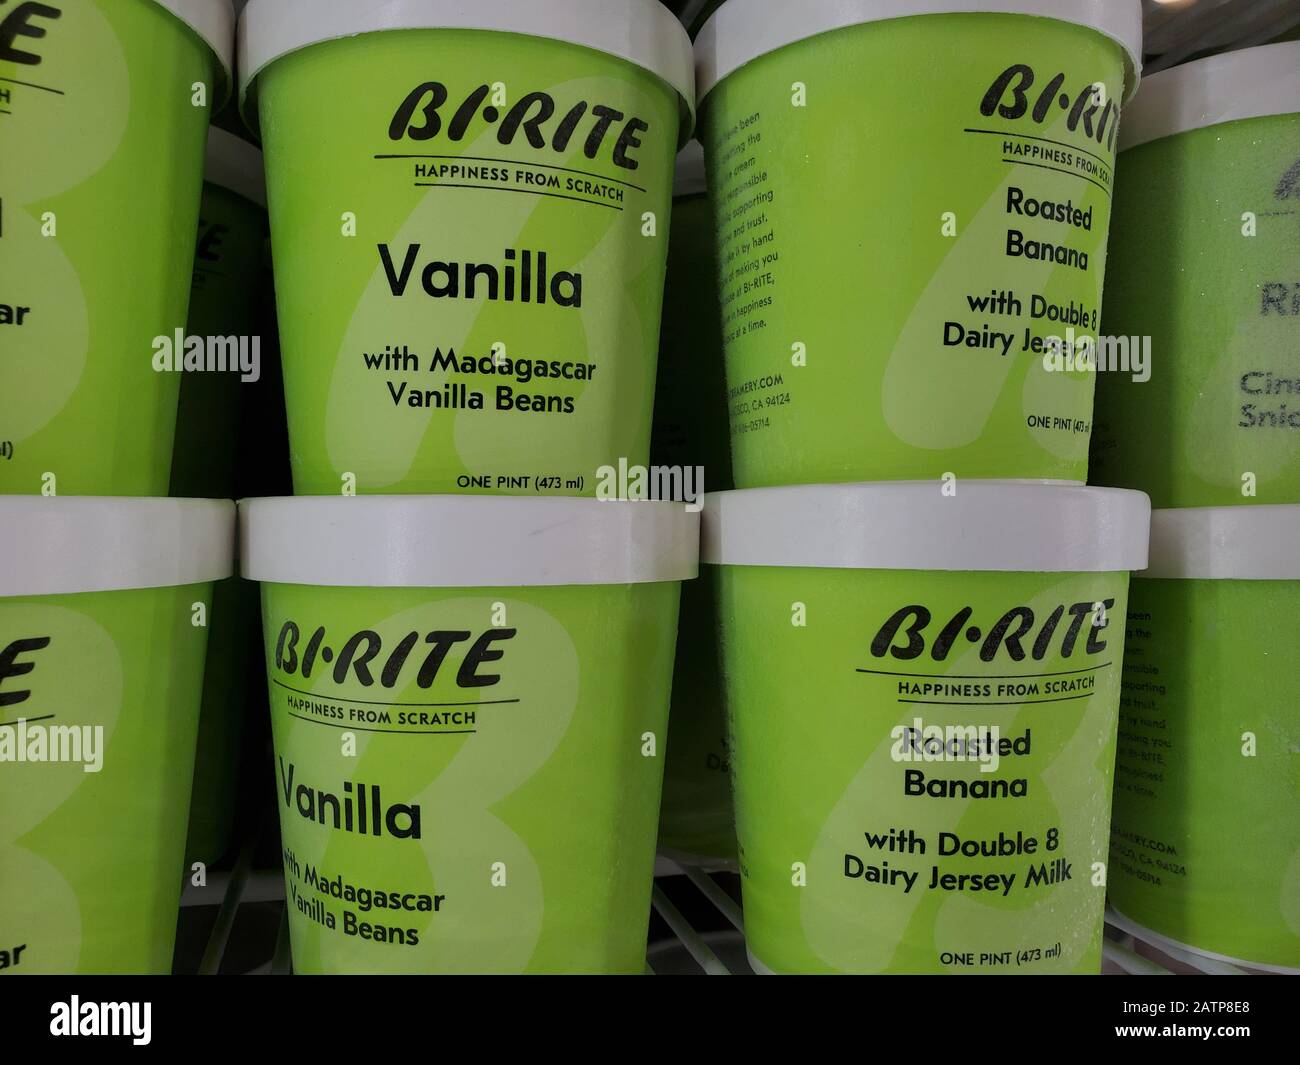 https://c8.alamy.com/comp/2ATP8E8/close-up-of-pint-containers-of-bi-rite-ice-cream-for-sale-at-the-iconic-bi-rite-creamery-in-the-mission-district-neighborhood-of-san-francisco-california-january-26-2020-2ATP8E8.jpg